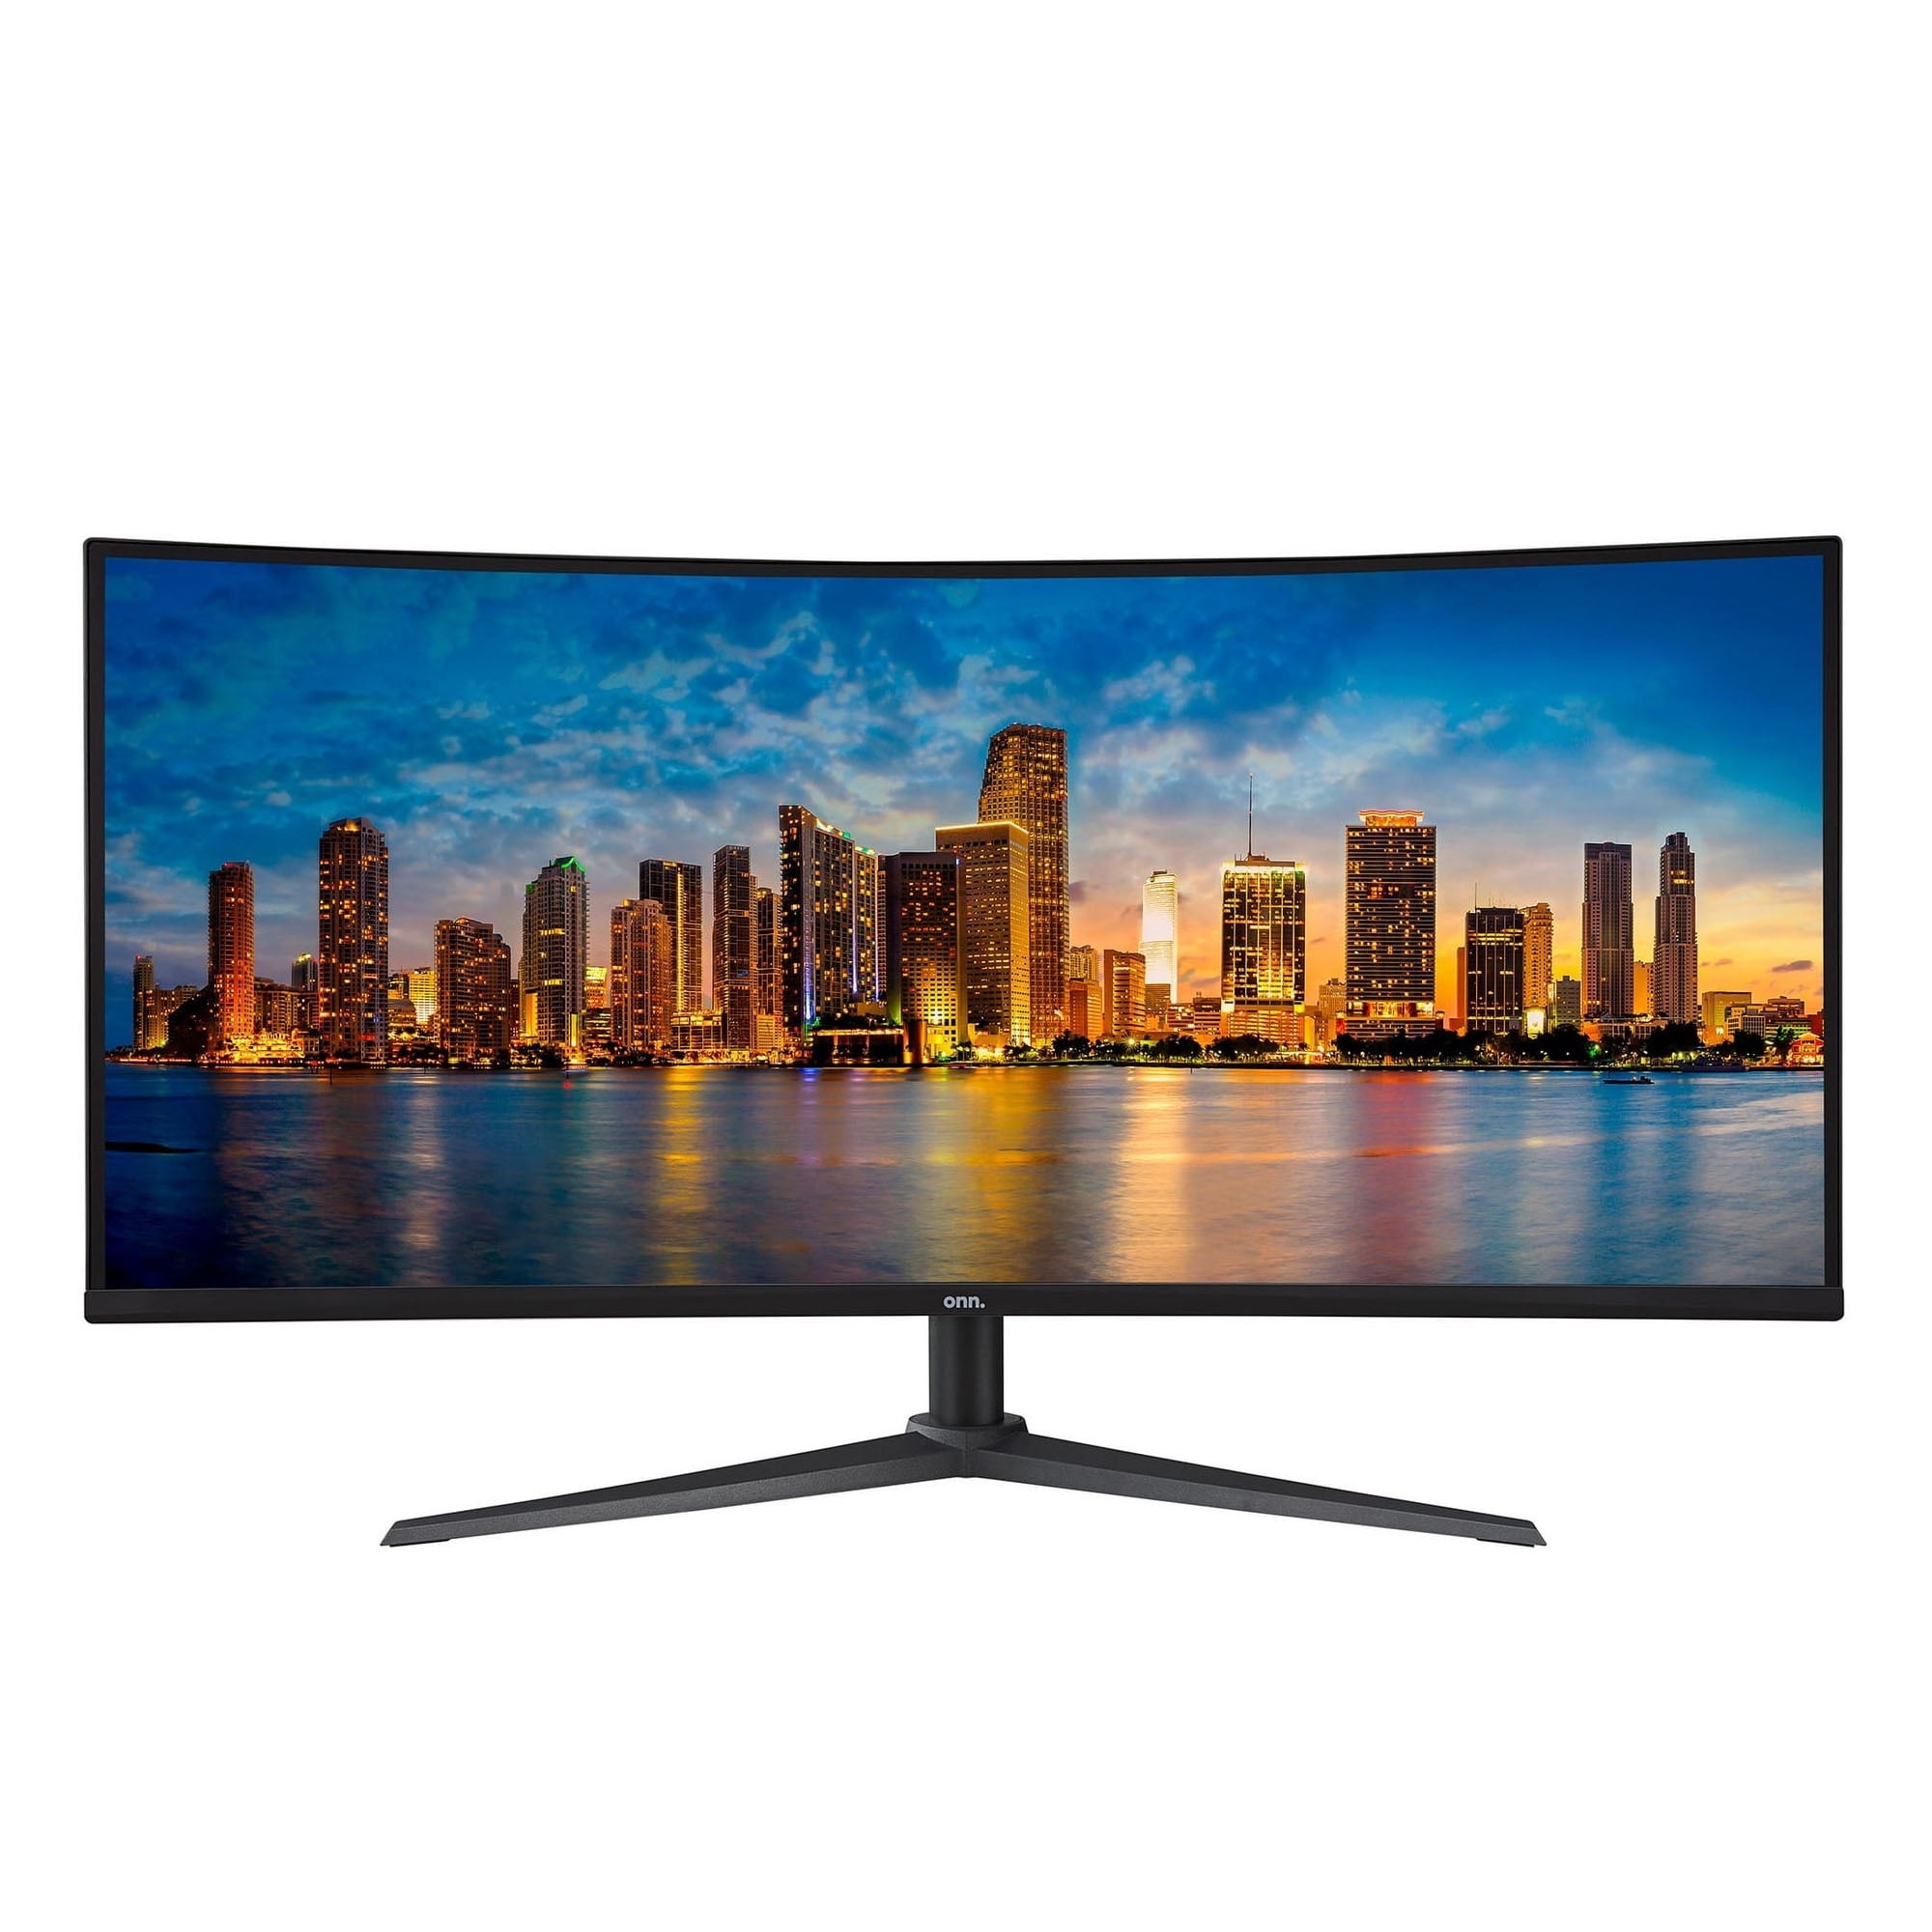 onn. (100133217) 34″ (3440 x 1440p) 100Hz Curved Ultrawide WQHD Bezel-Less Office Monitor with Cable